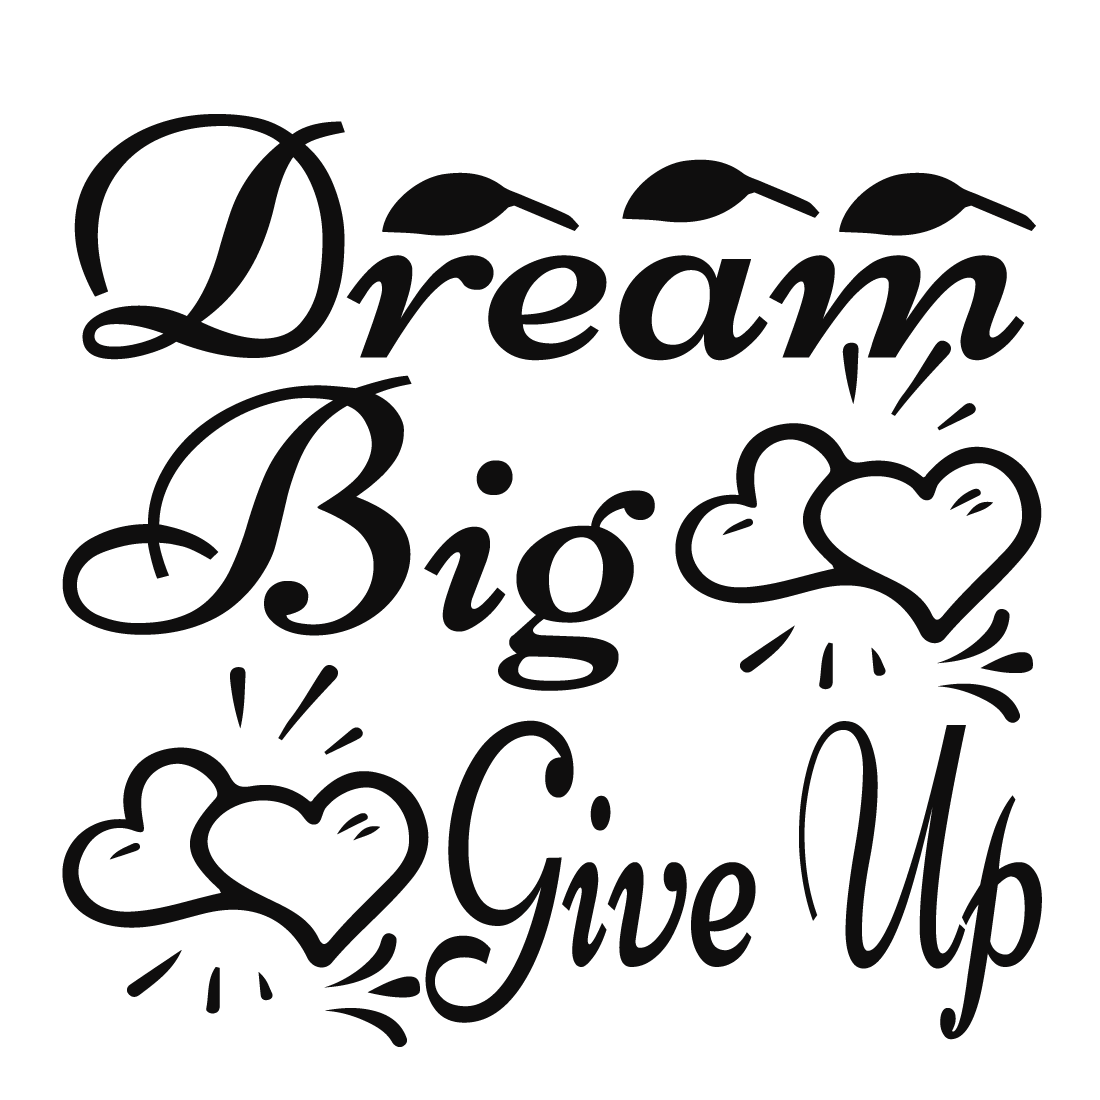 Dream Big Give up preview image.